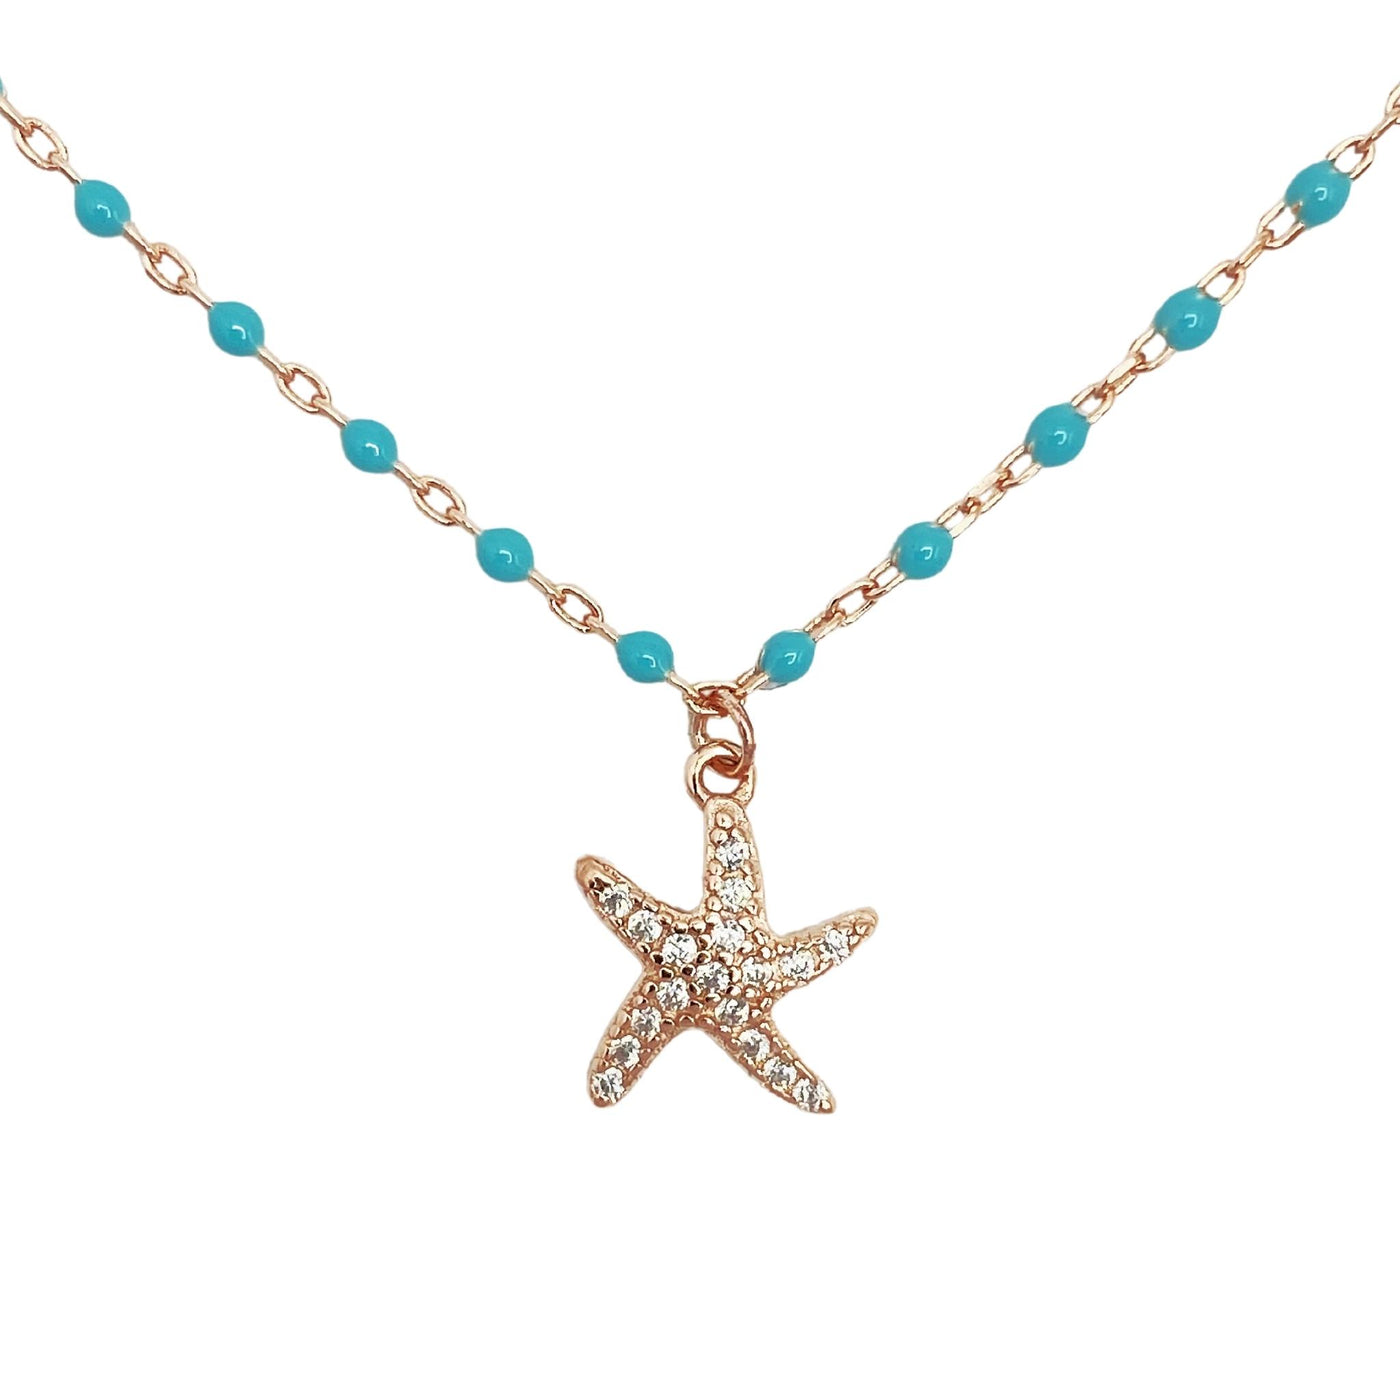 Silver enamel necklace with starfish charm